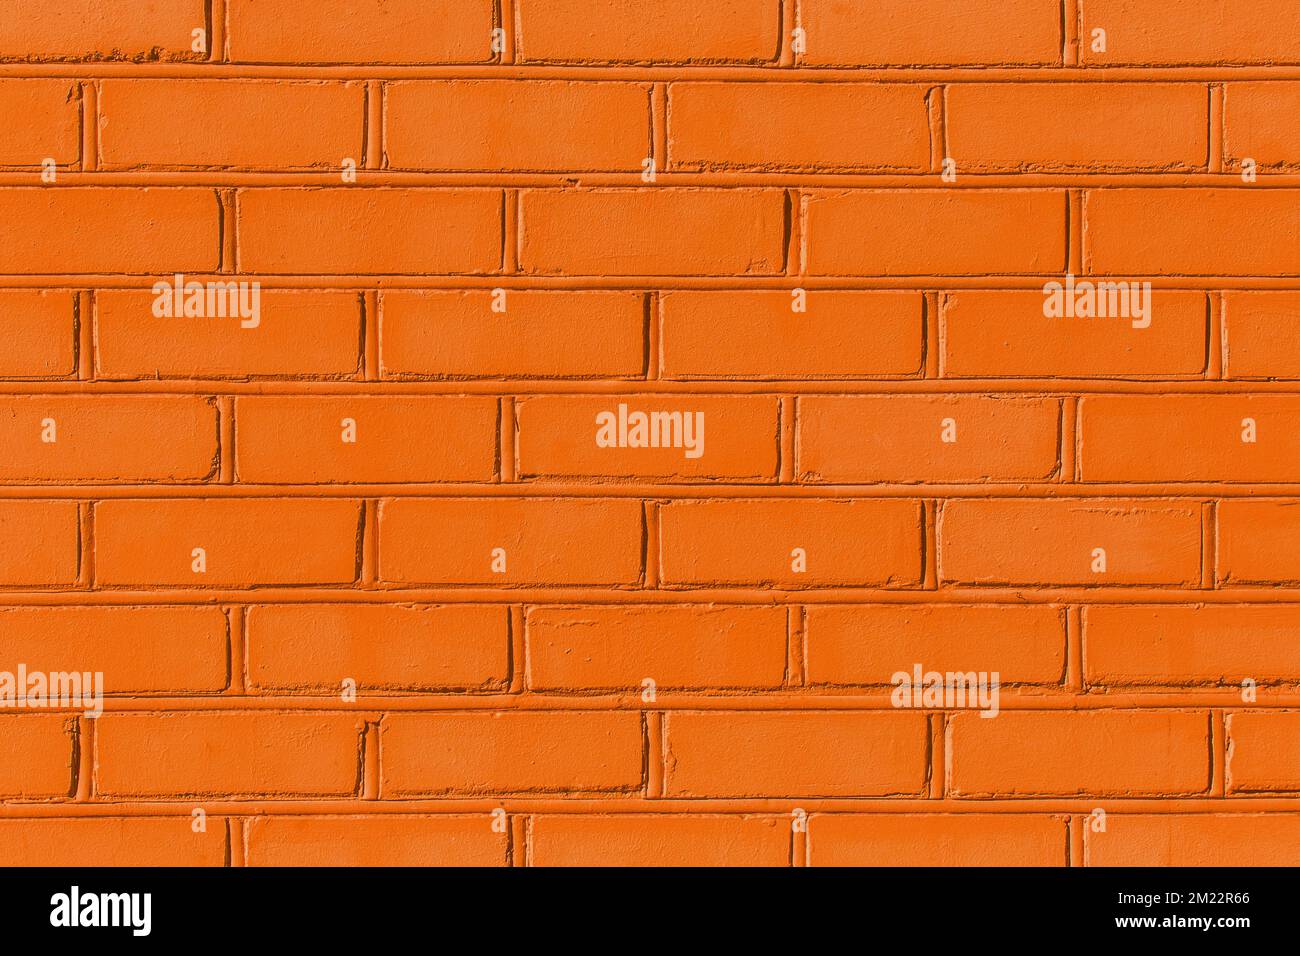 Orange-brown paint on brick old wall texture background abstract pattern stone. Stock Photo